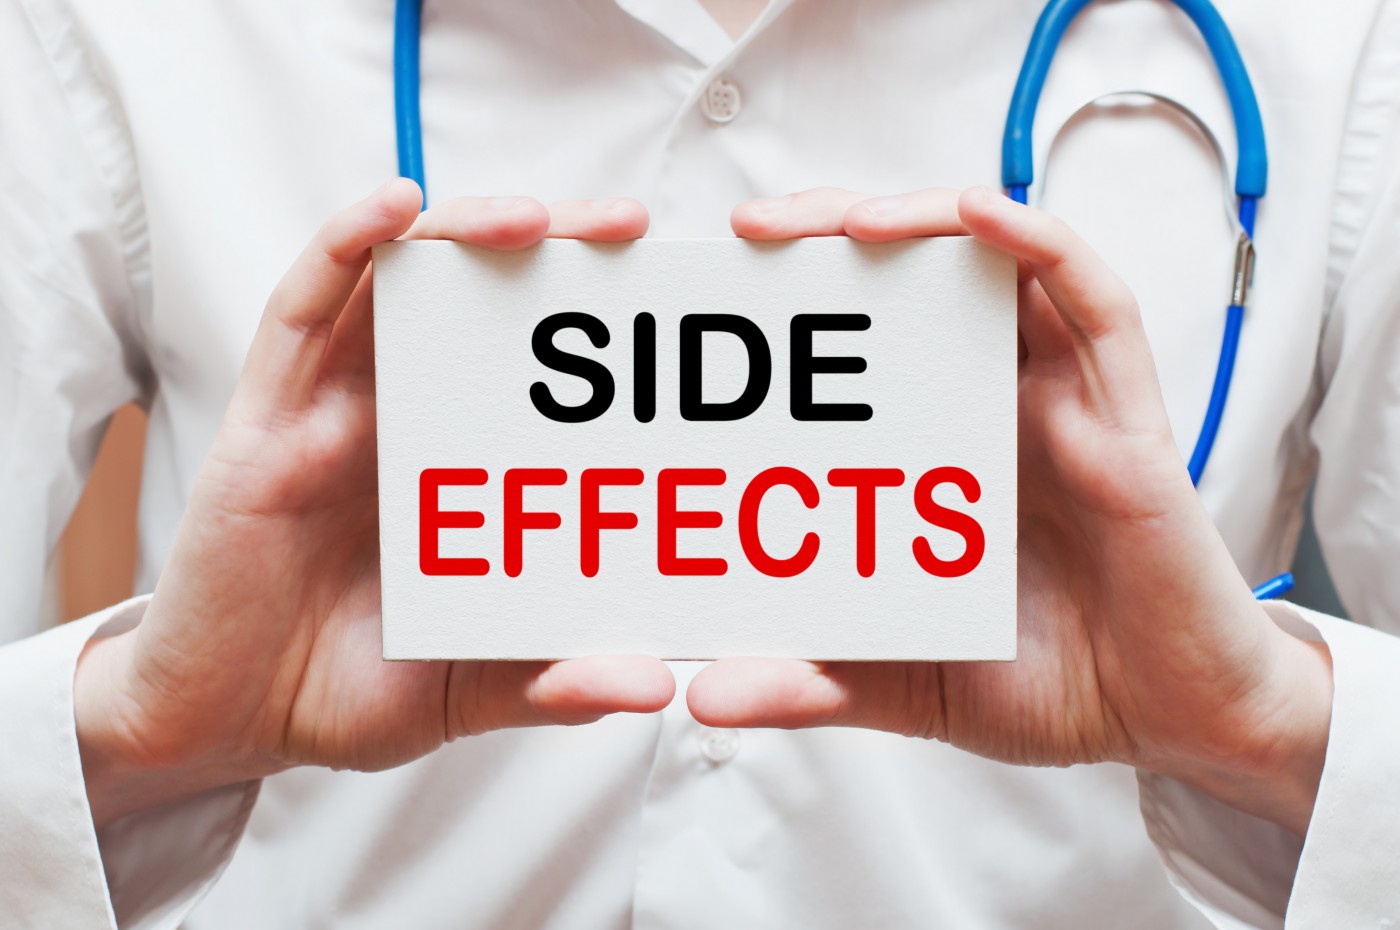 MS treatment side effects